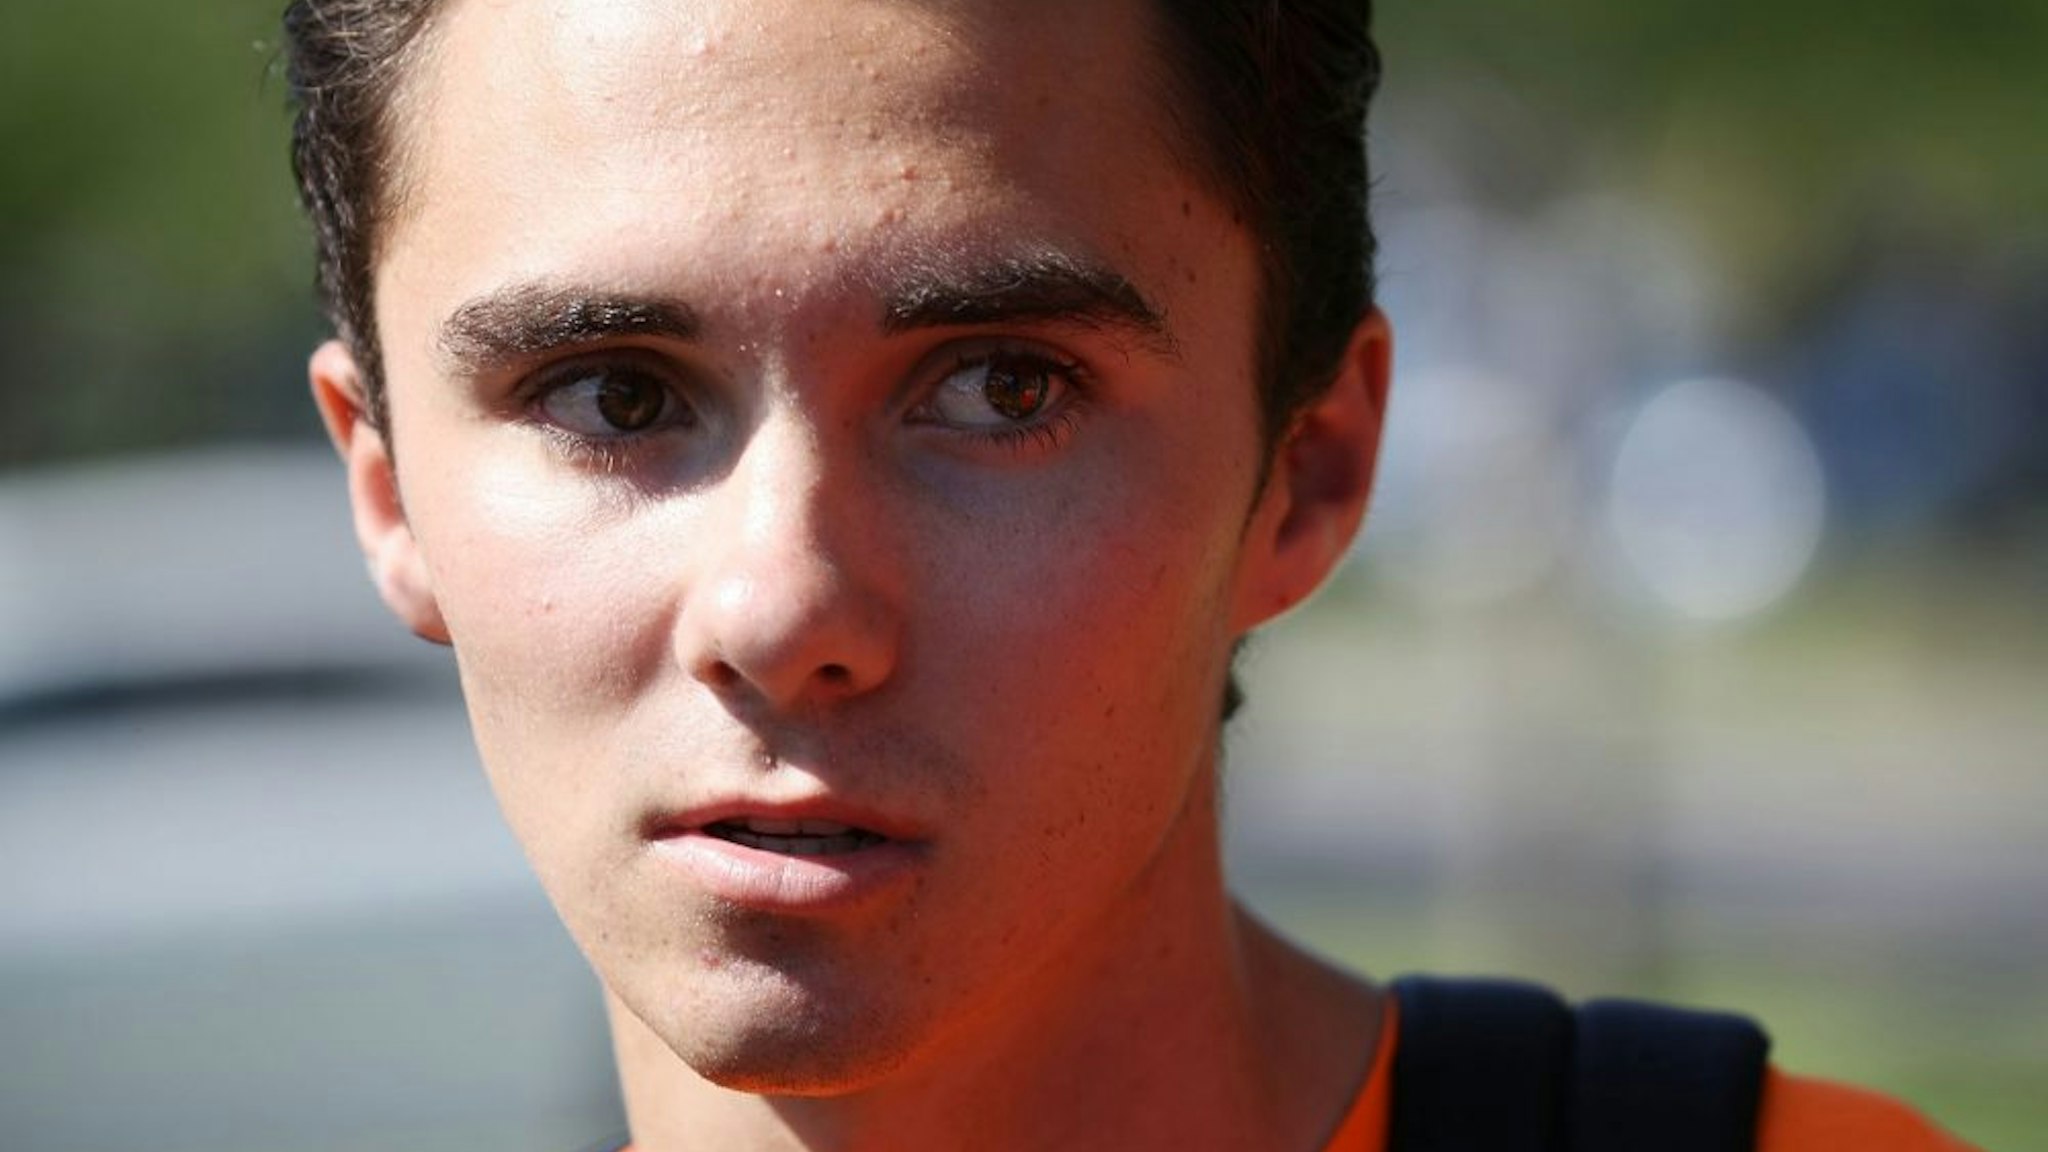 PARKLAND, FL - APRIL 20: David Hogg joins his fellow students from Marjory Stoneman Douglas High School, where 17 classmates and teachers were killed during a mass shooting, for the National School Walkout on April 20, 2018 in Parkland, Florida. Students from around the nation joined in school walkouts against gun violence on the 19th anniversary of the shooting at Columbine High School in Colorado where 13 people were killed.